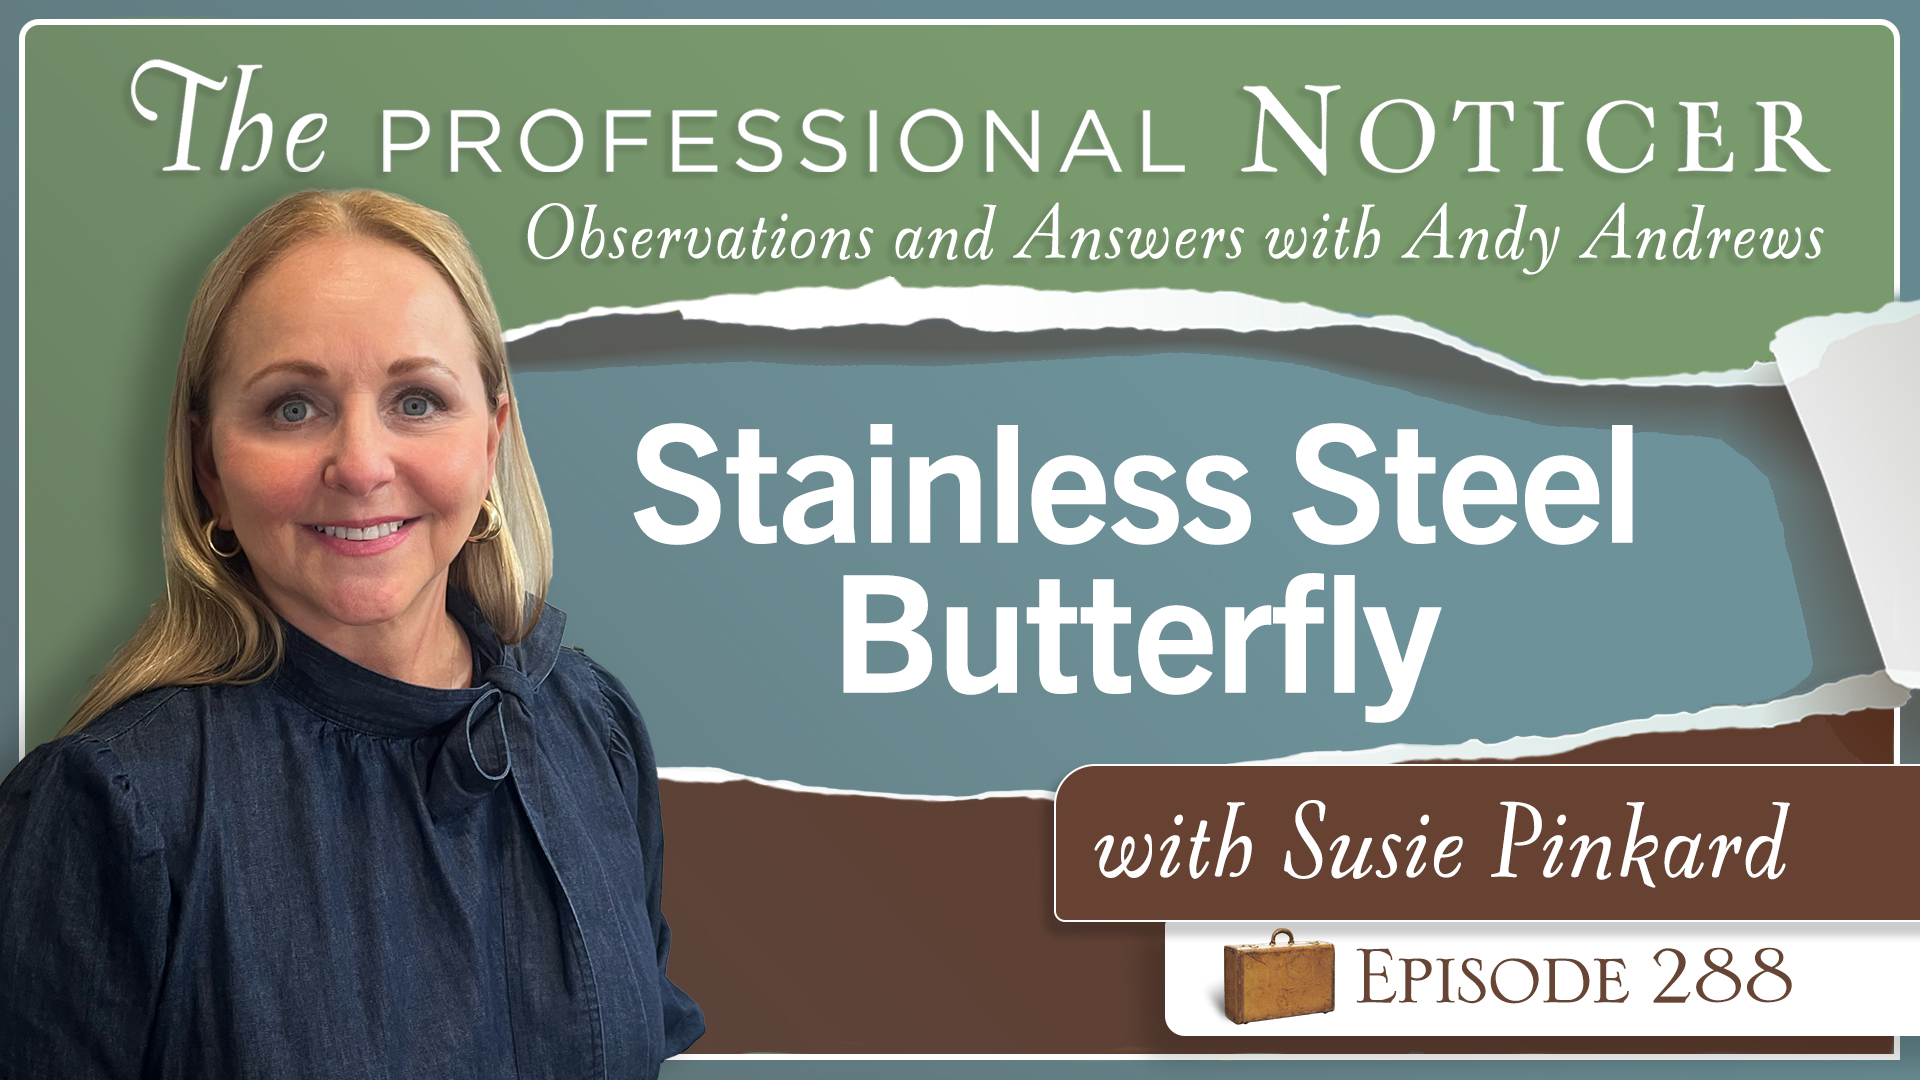 Stainless Steel Butterfly with Susie Pinkard